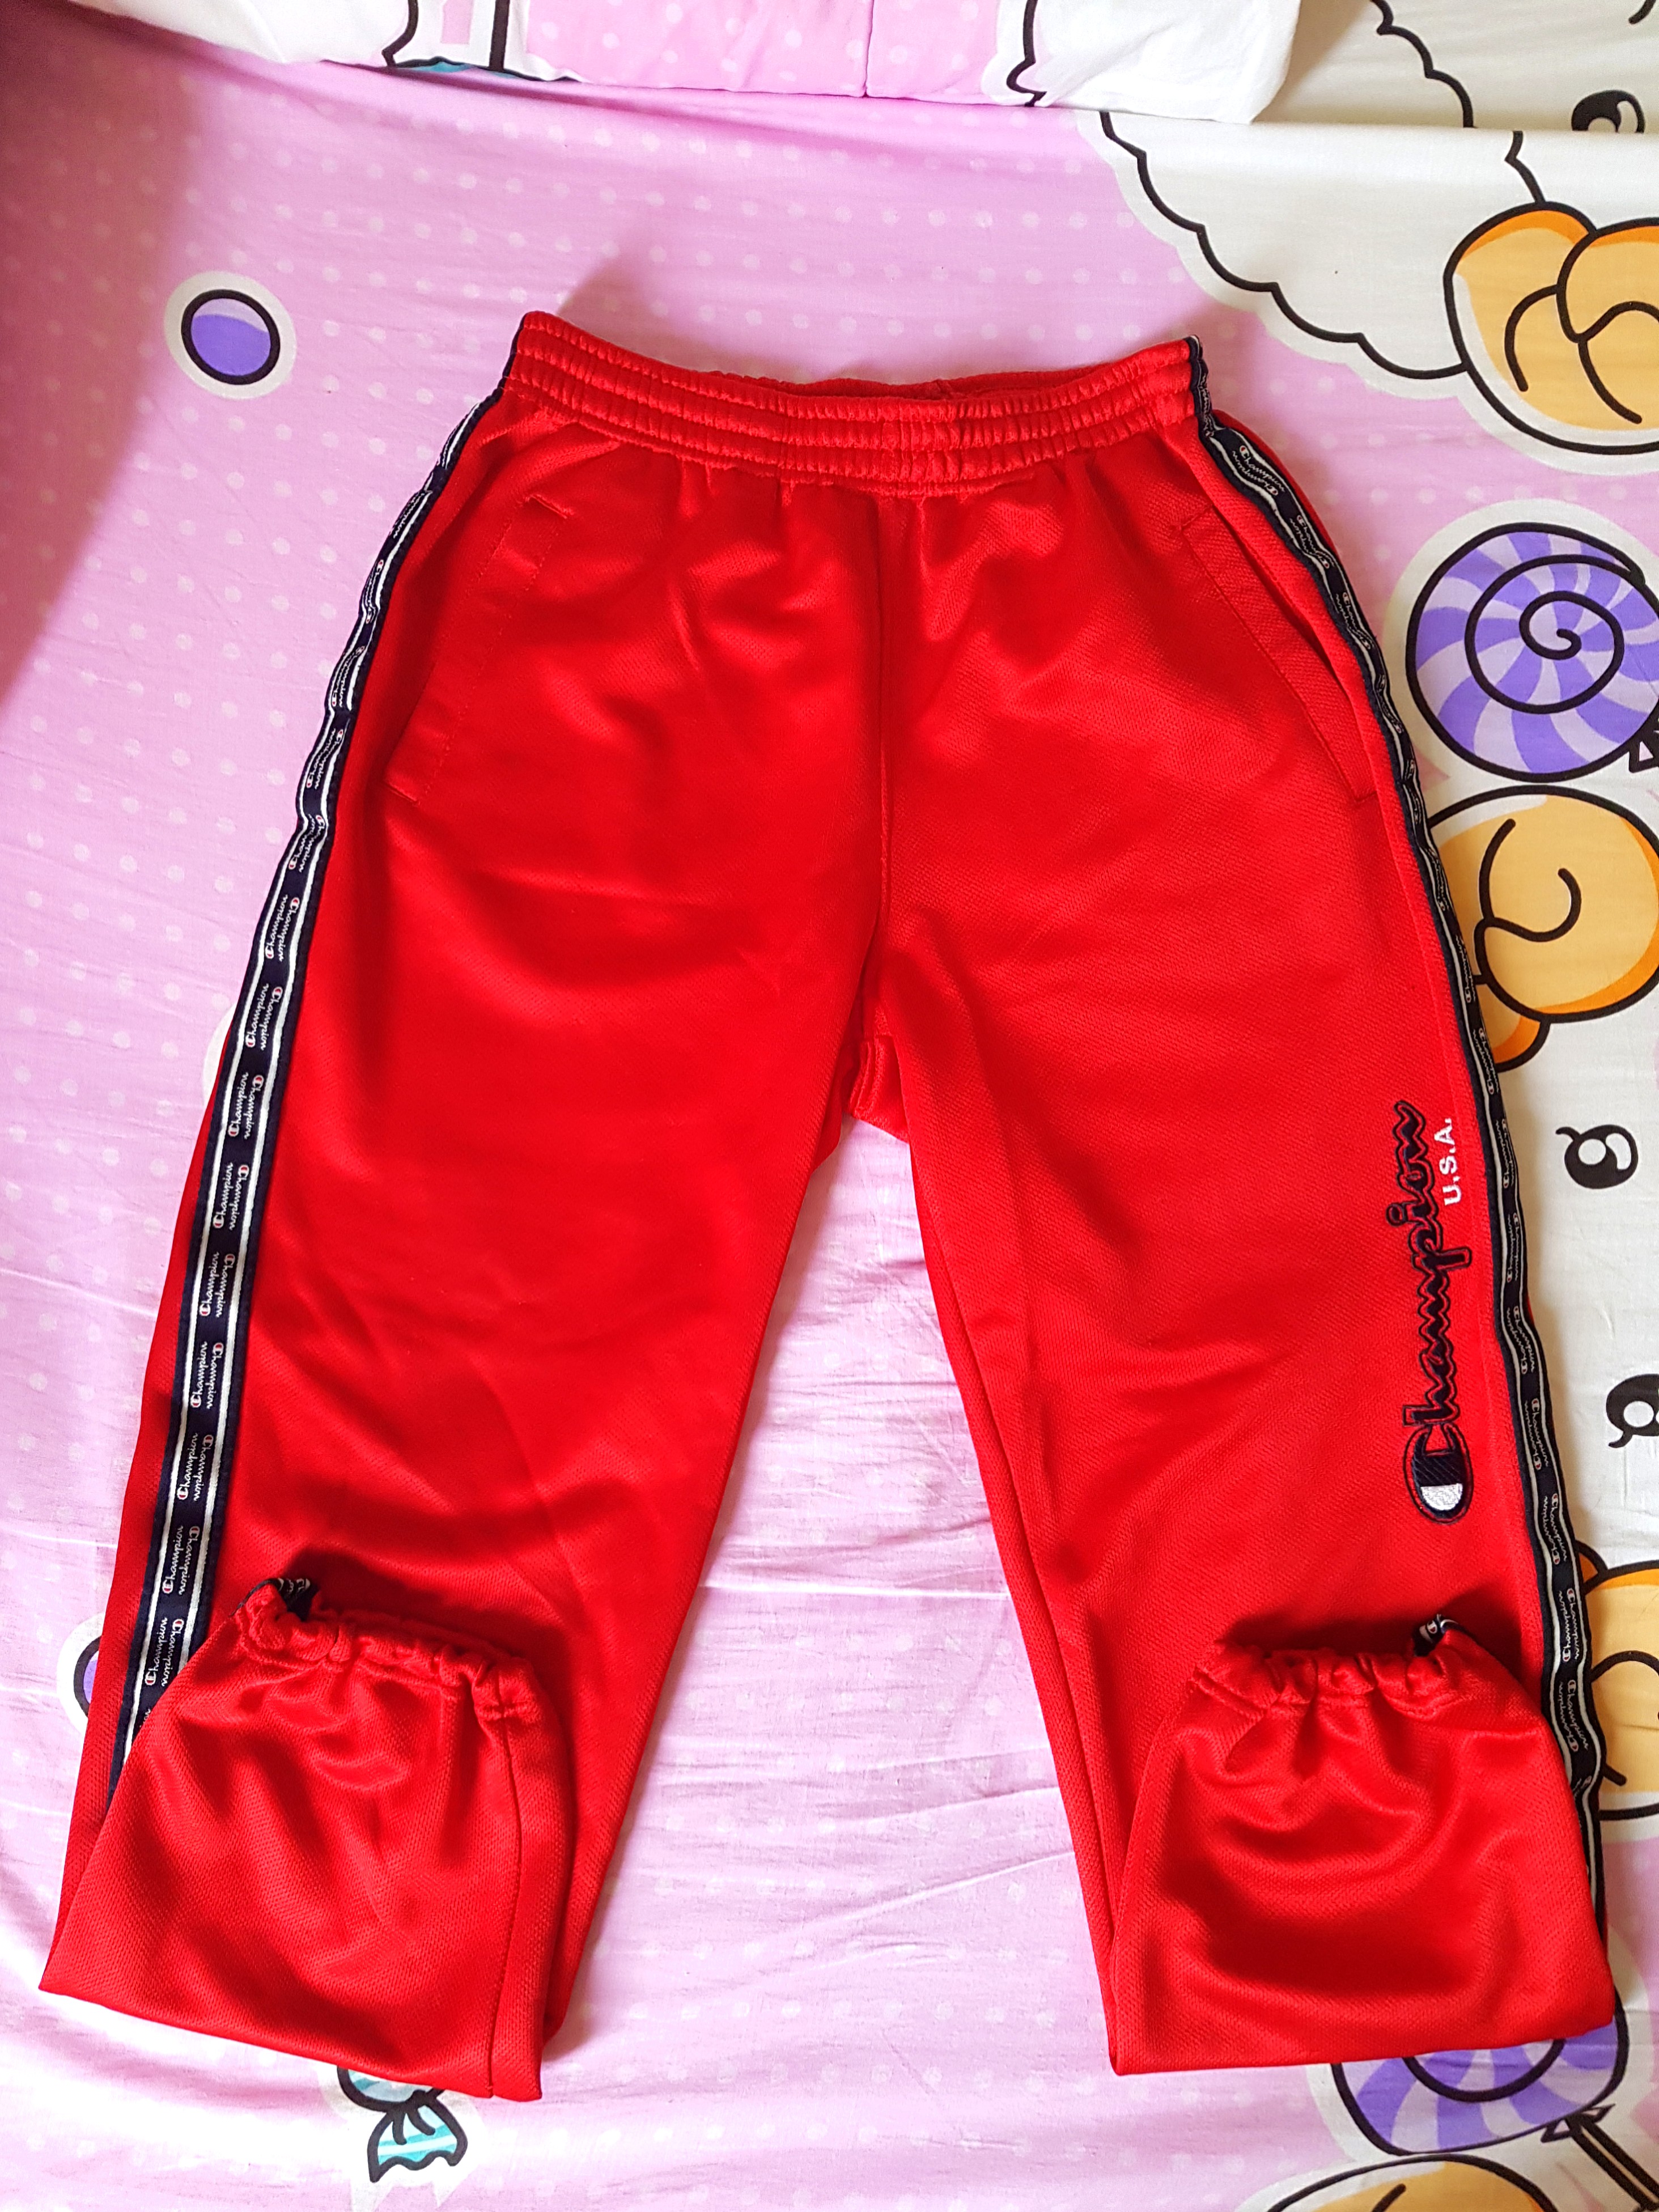 red champion track pants